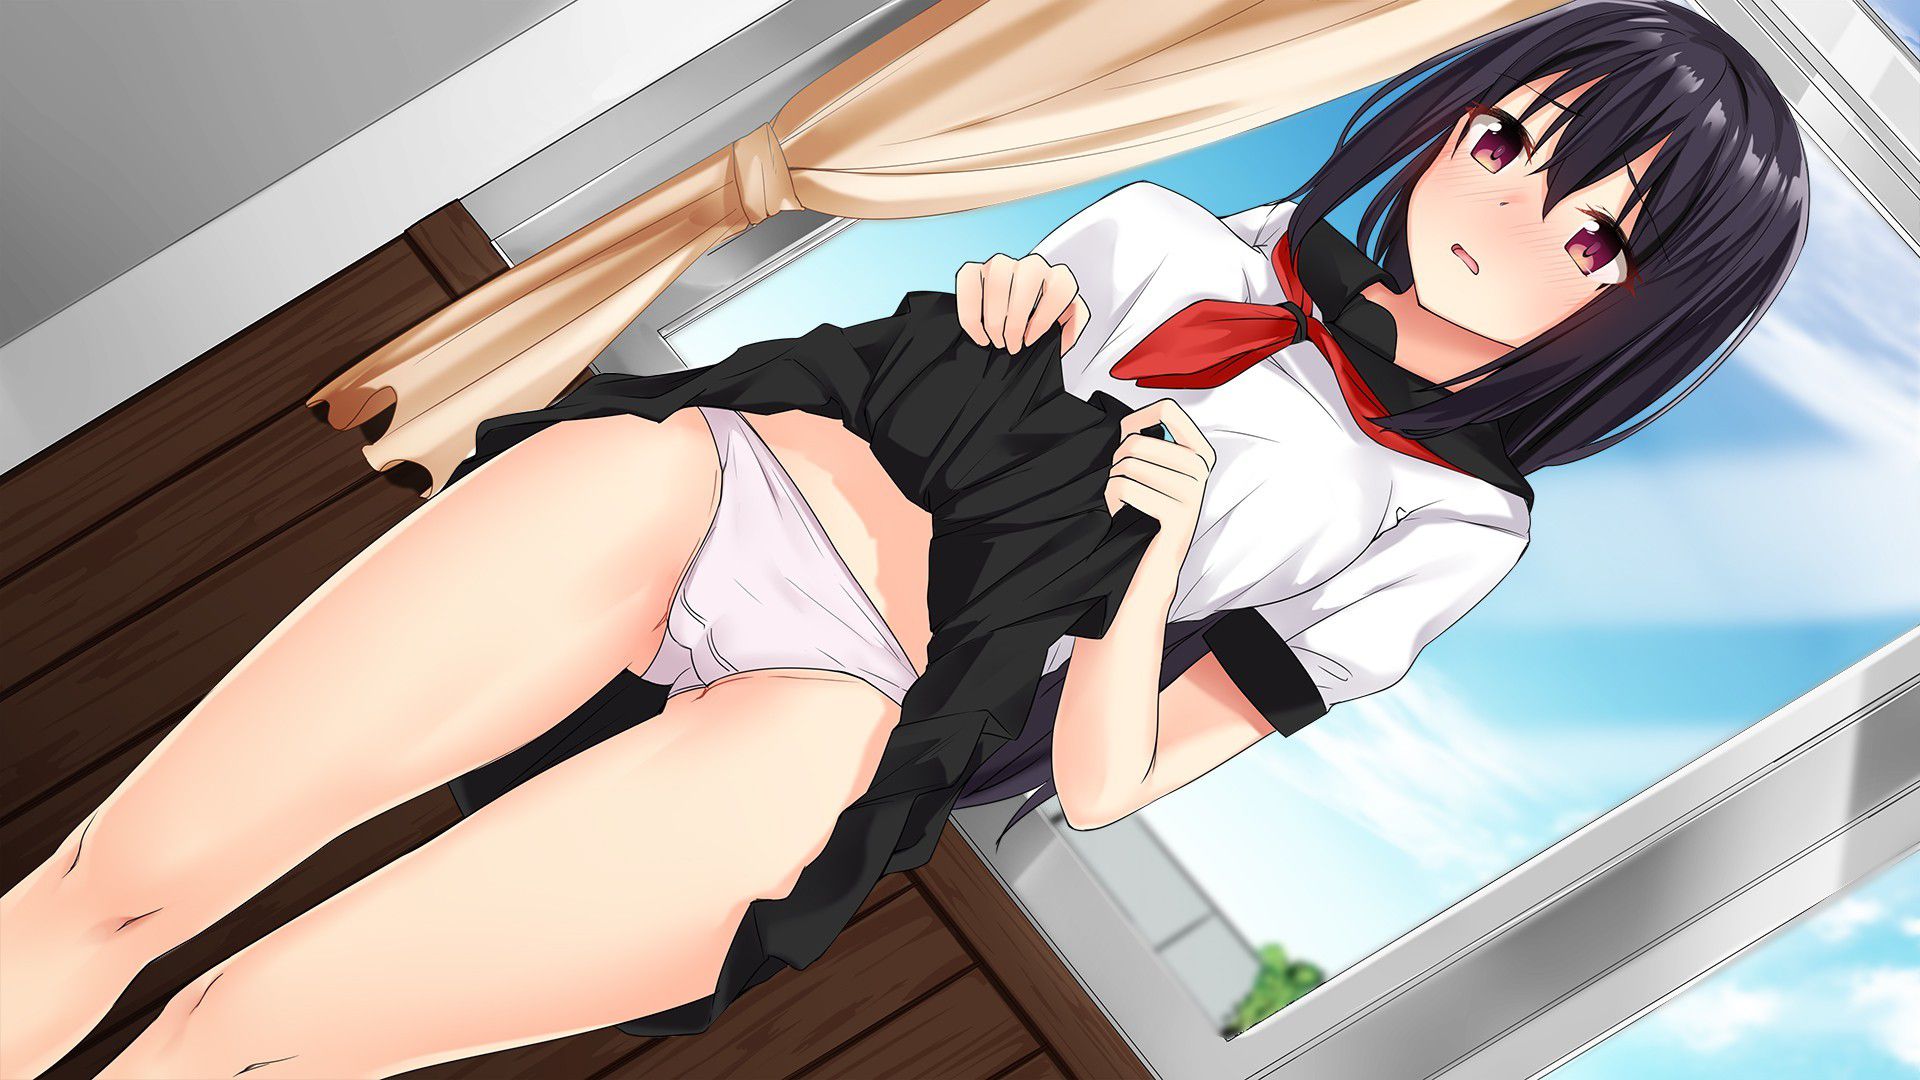 Erotic anime summary Beautiful girls who have blushed too much of shame [secondary erotic] 21